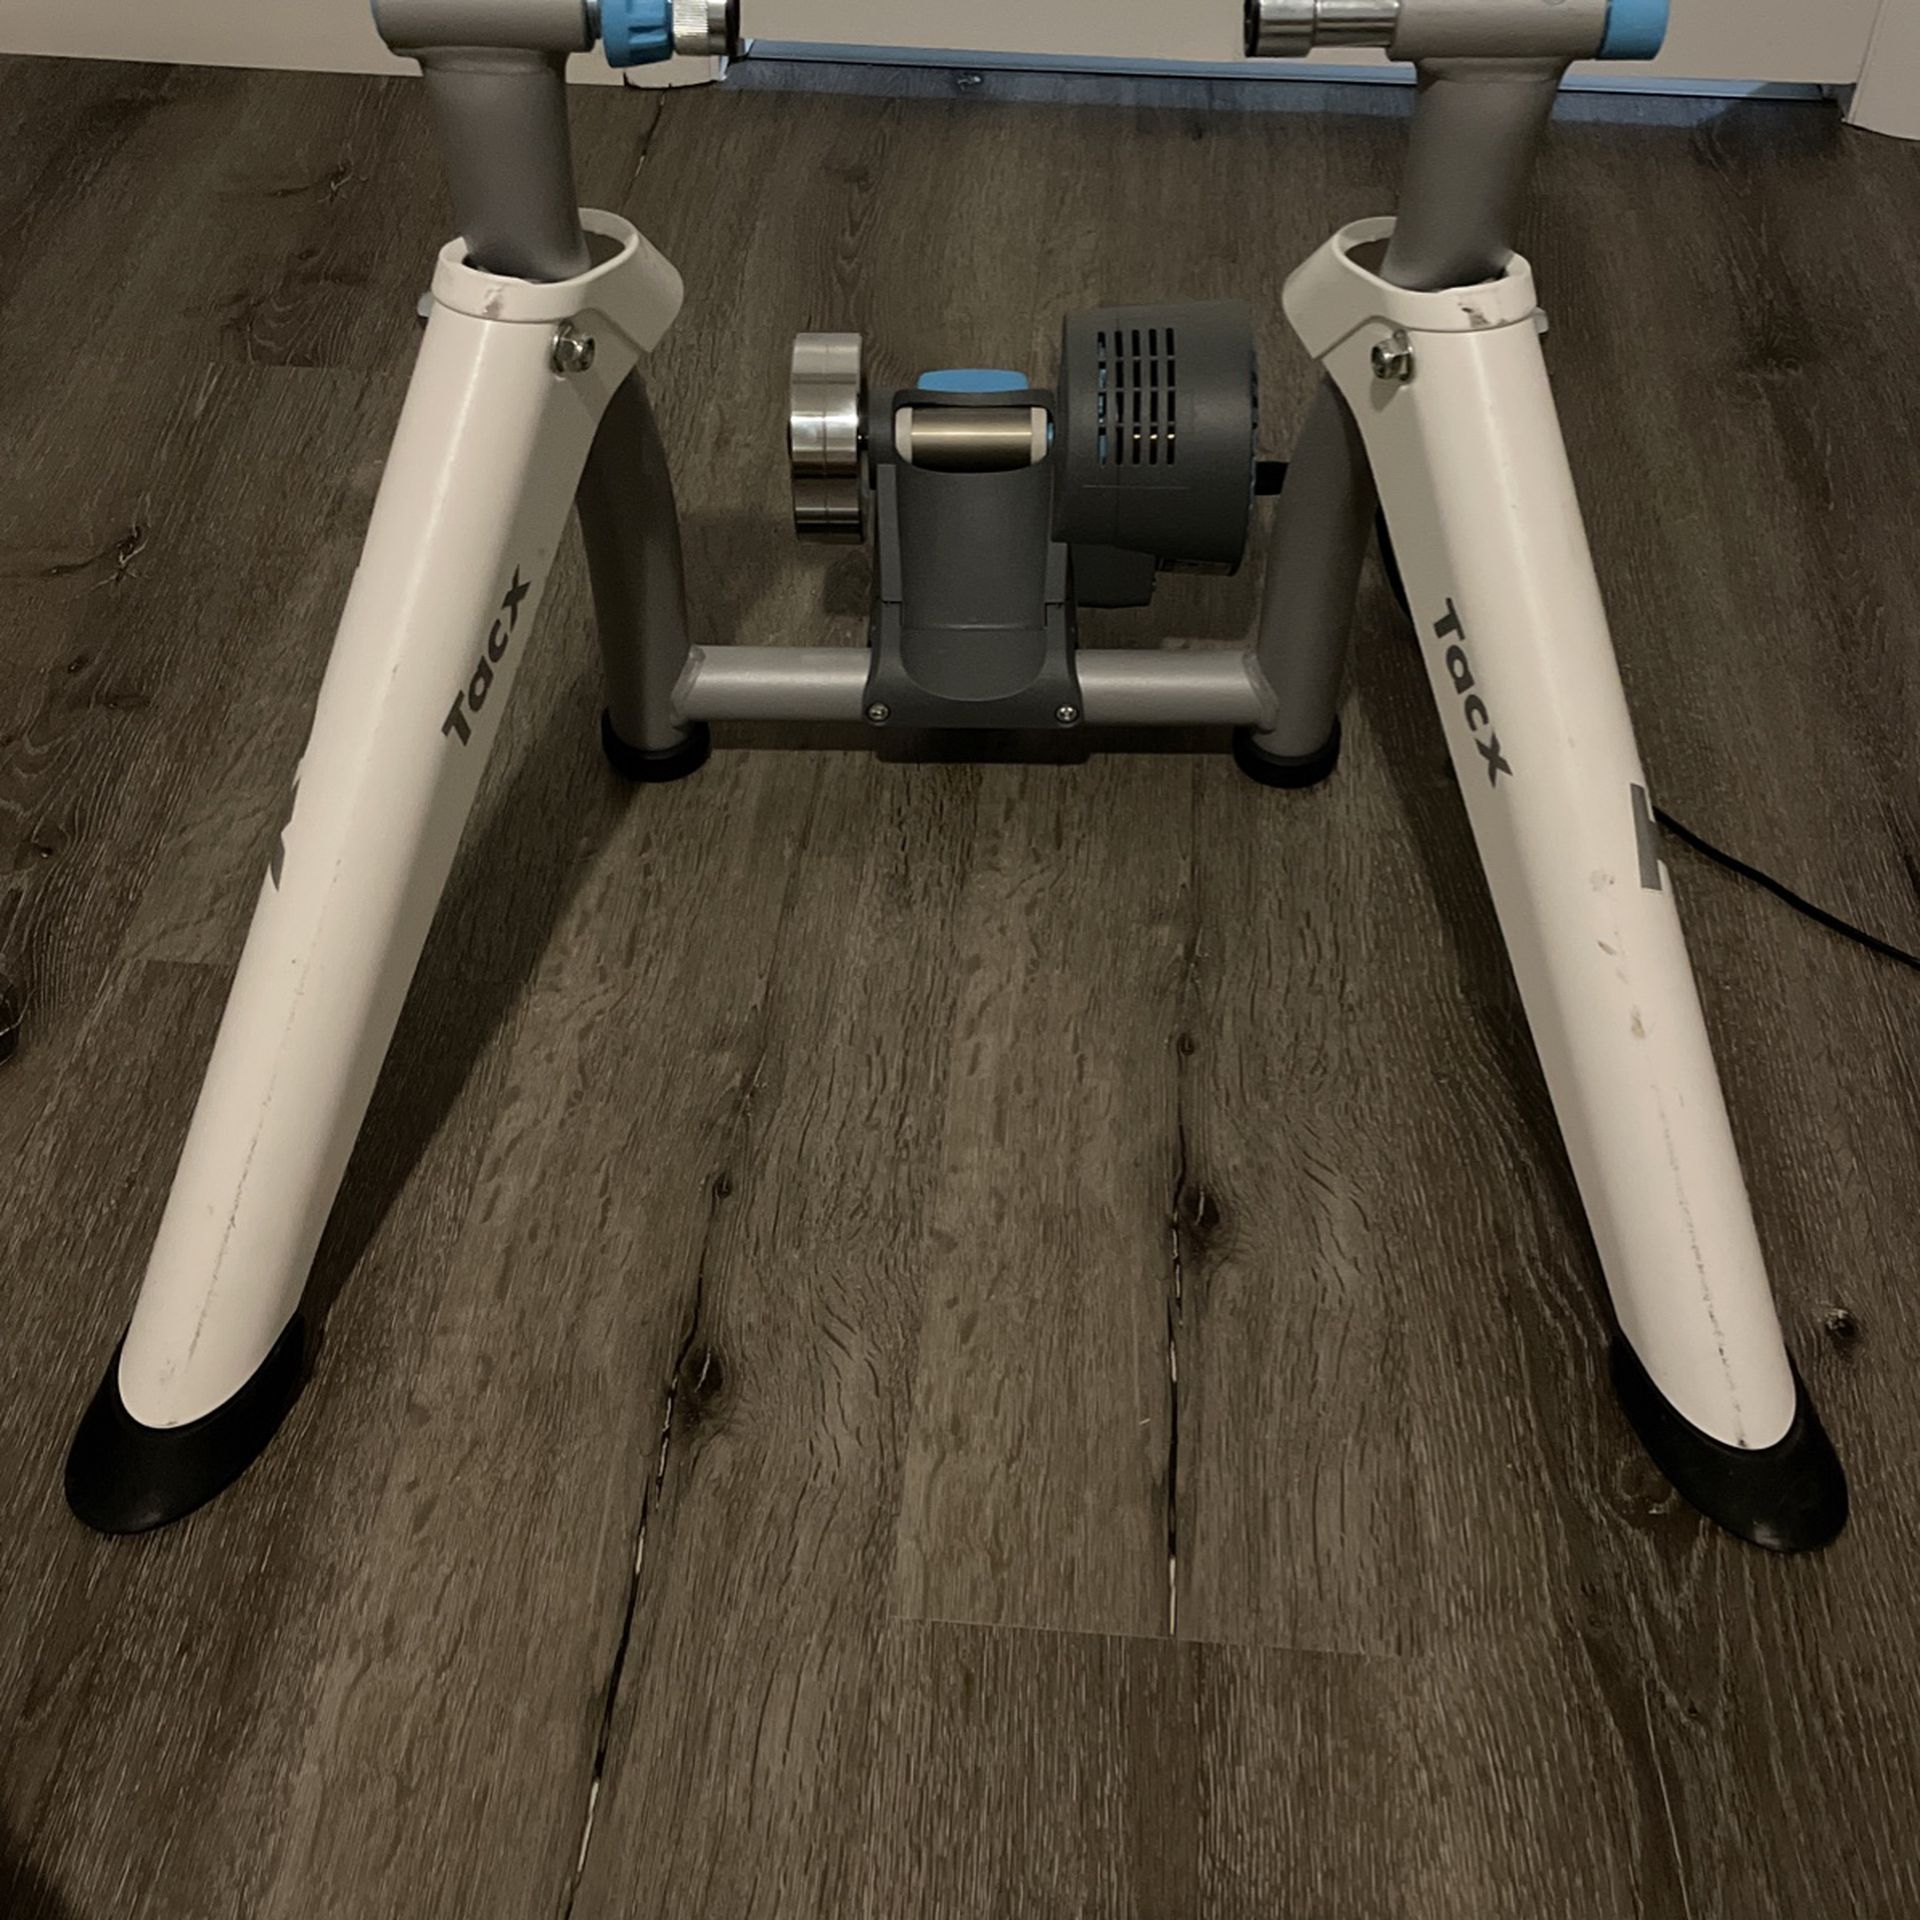 Tacx Flow Smart Trainer, One size - T2240